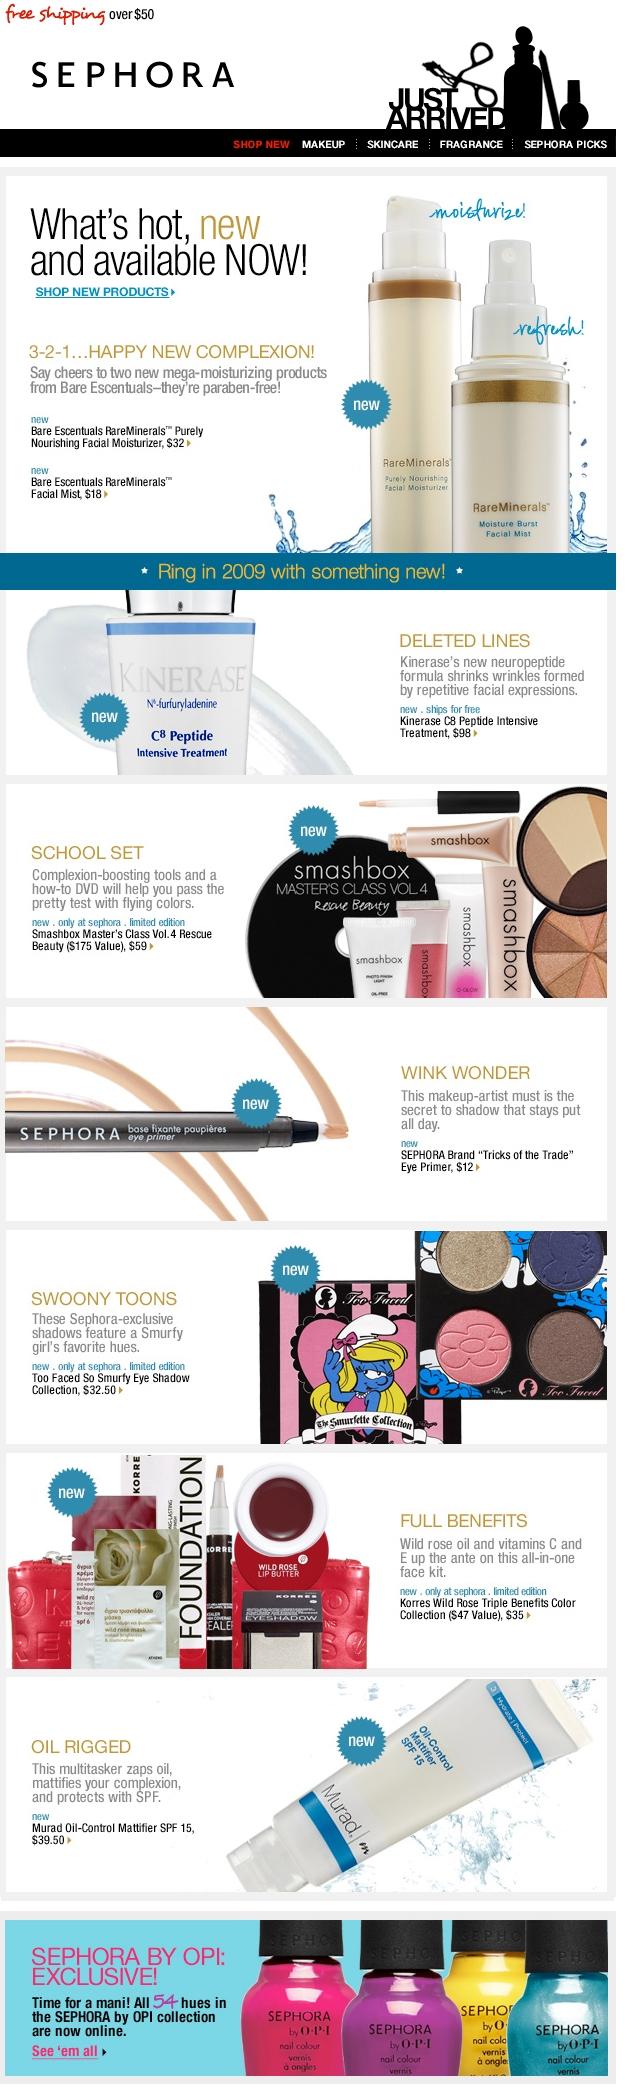 Sephora US - Objet : Brand new year, brand new products